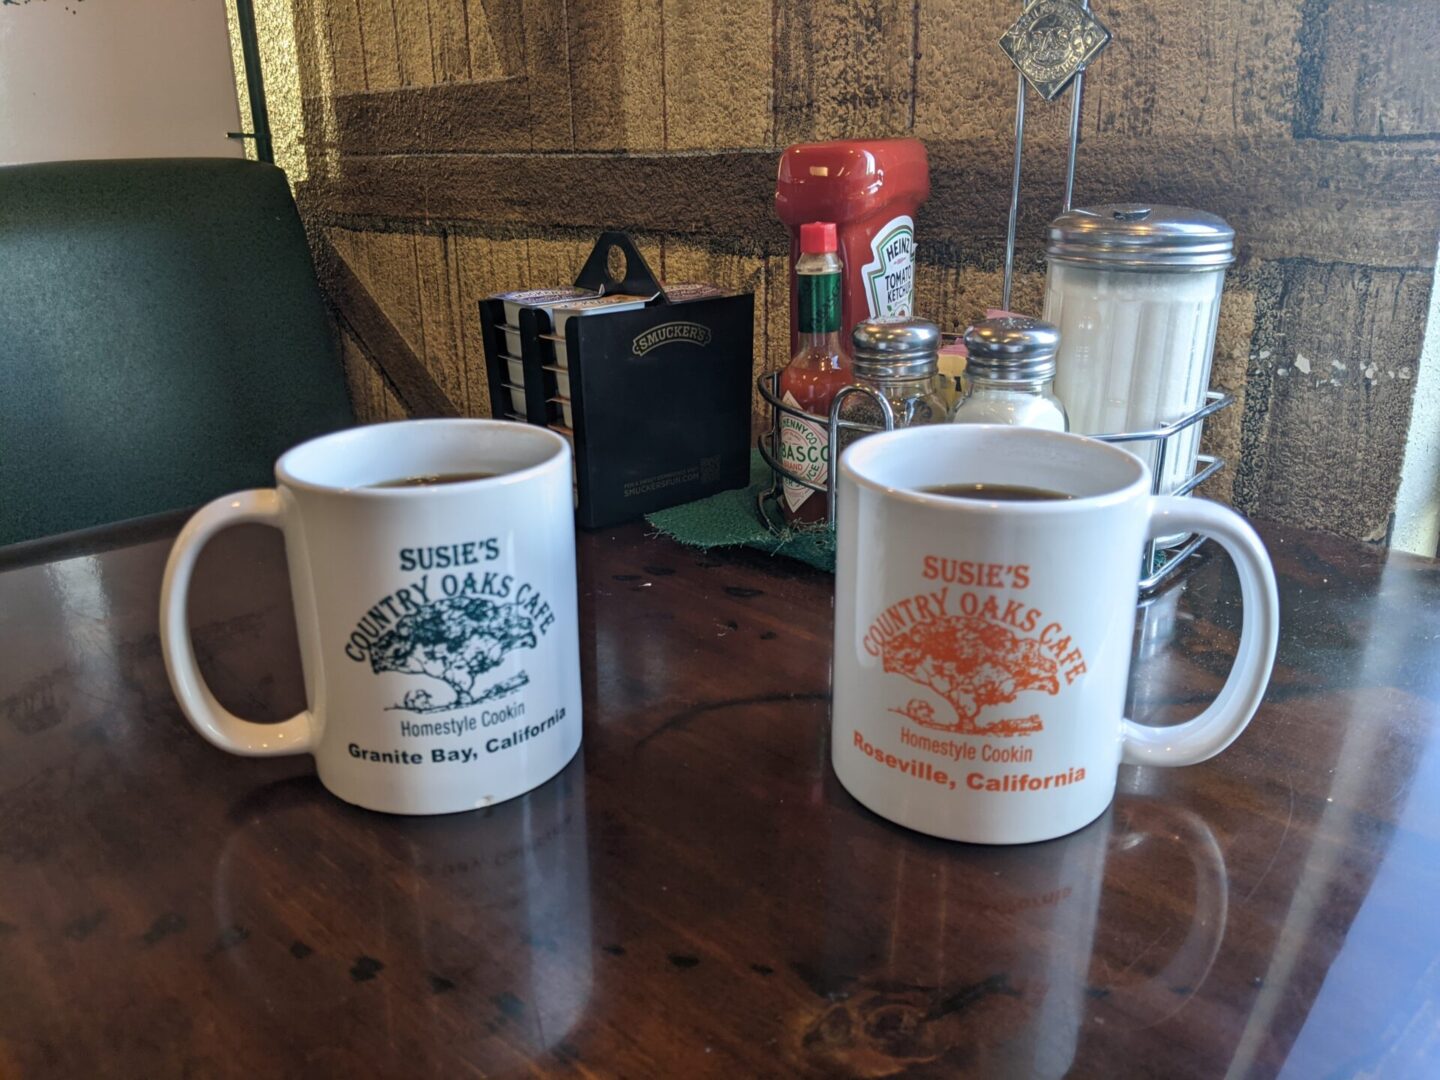 Two coffee cups sitting on a table with other items.